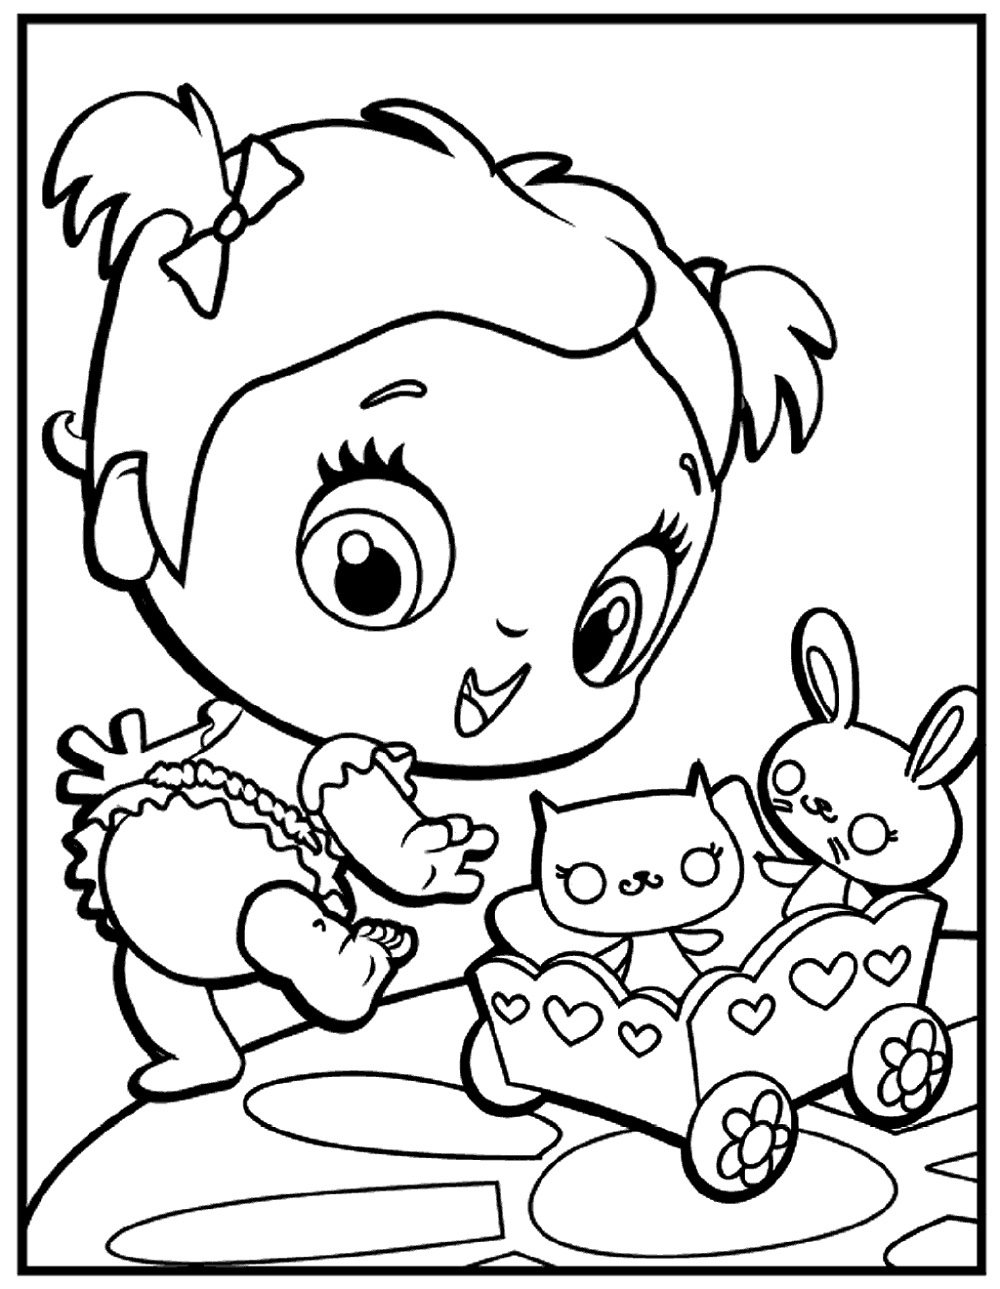 Baby Alive Doll Coloring Pages (Page 1) - Line.17QQ.com